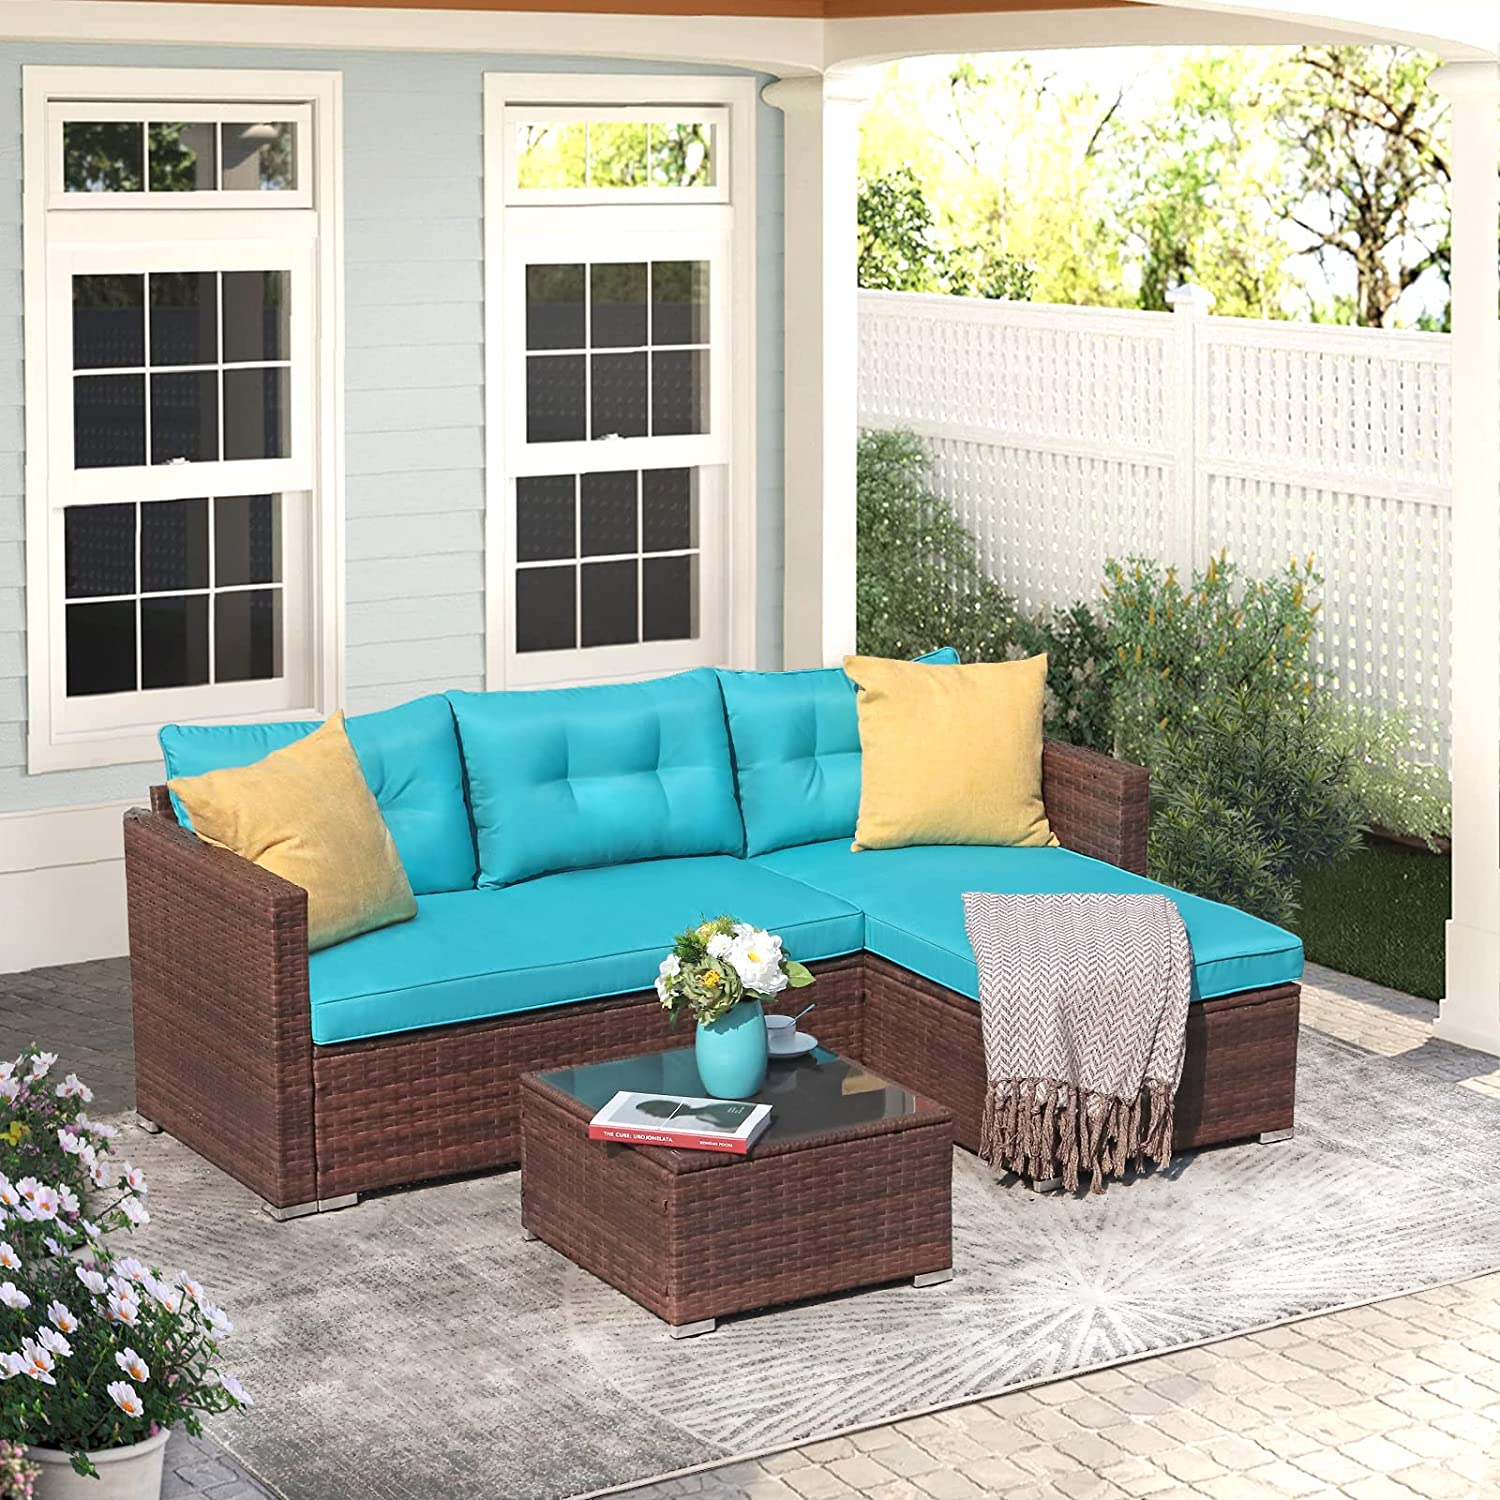 OC Orange-Casual 5-Piece Patio Furniture Set, All-Weather Outdoor Sectional Sofa, with Glass Coffee Table for Deck Balcony Porch, Brown Rattan & Turquoise Cushion - image 3 of 8